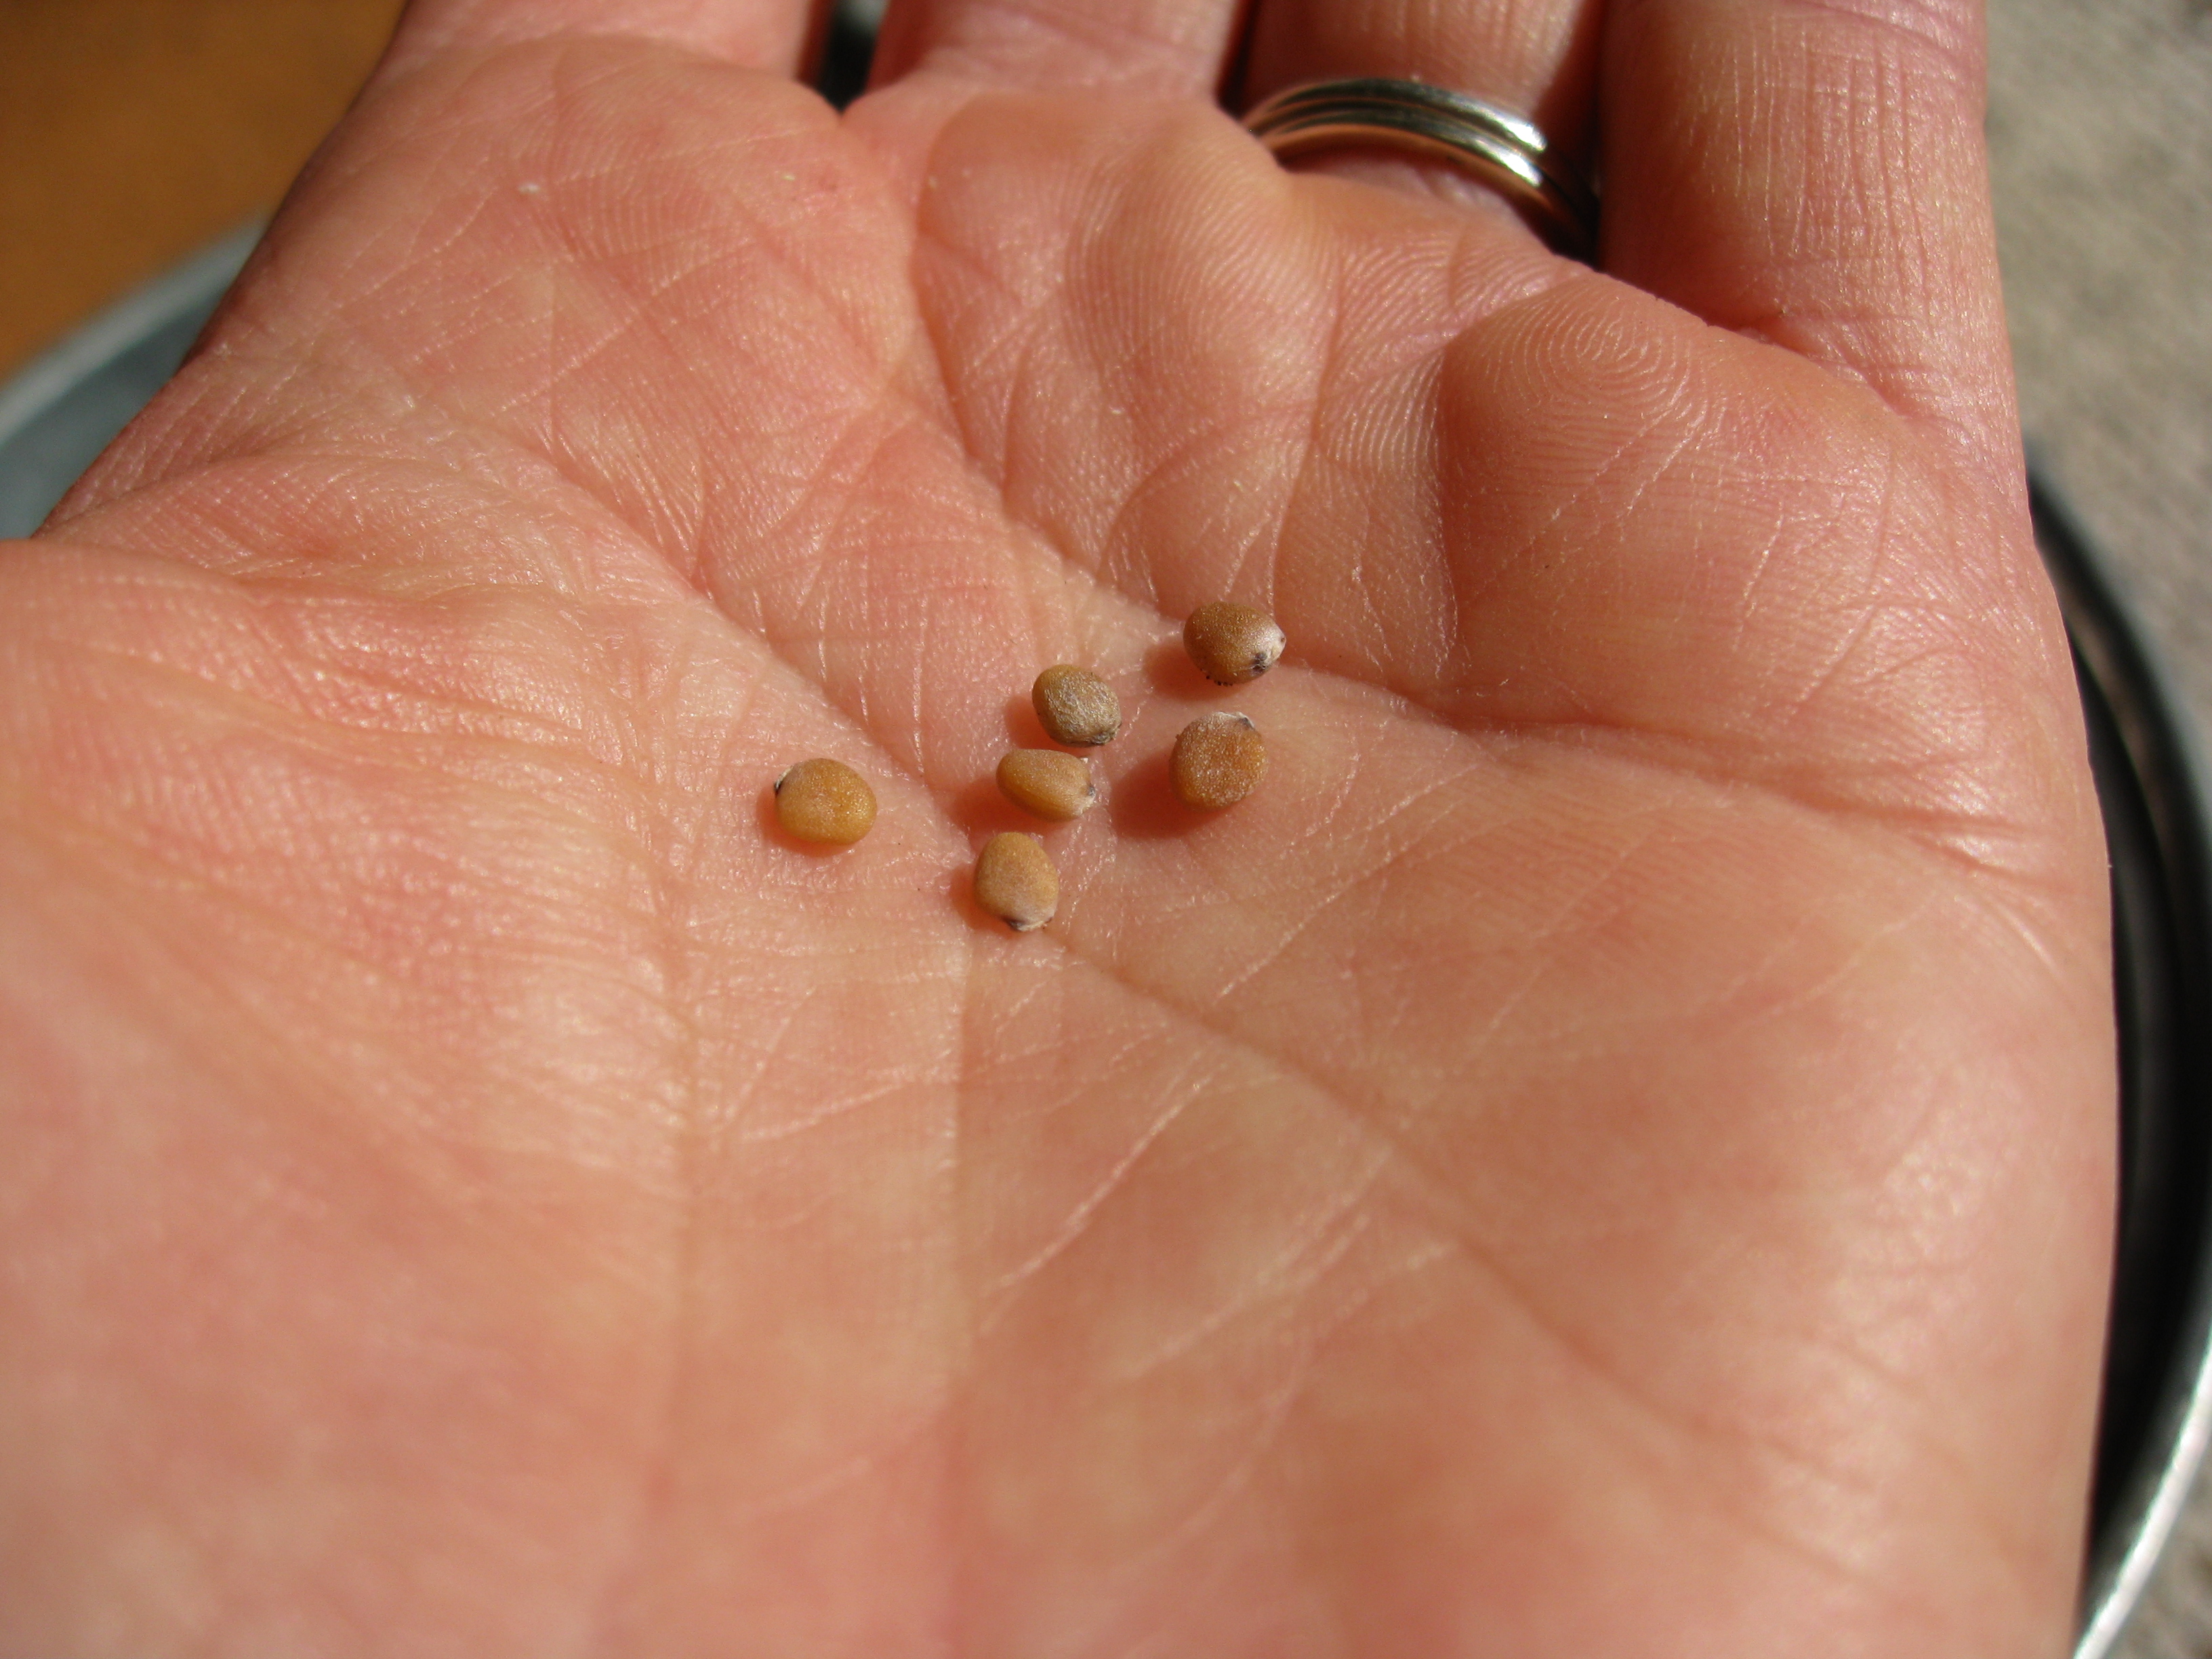 Radish seeds are medium sized, so you won't need a very small screen.